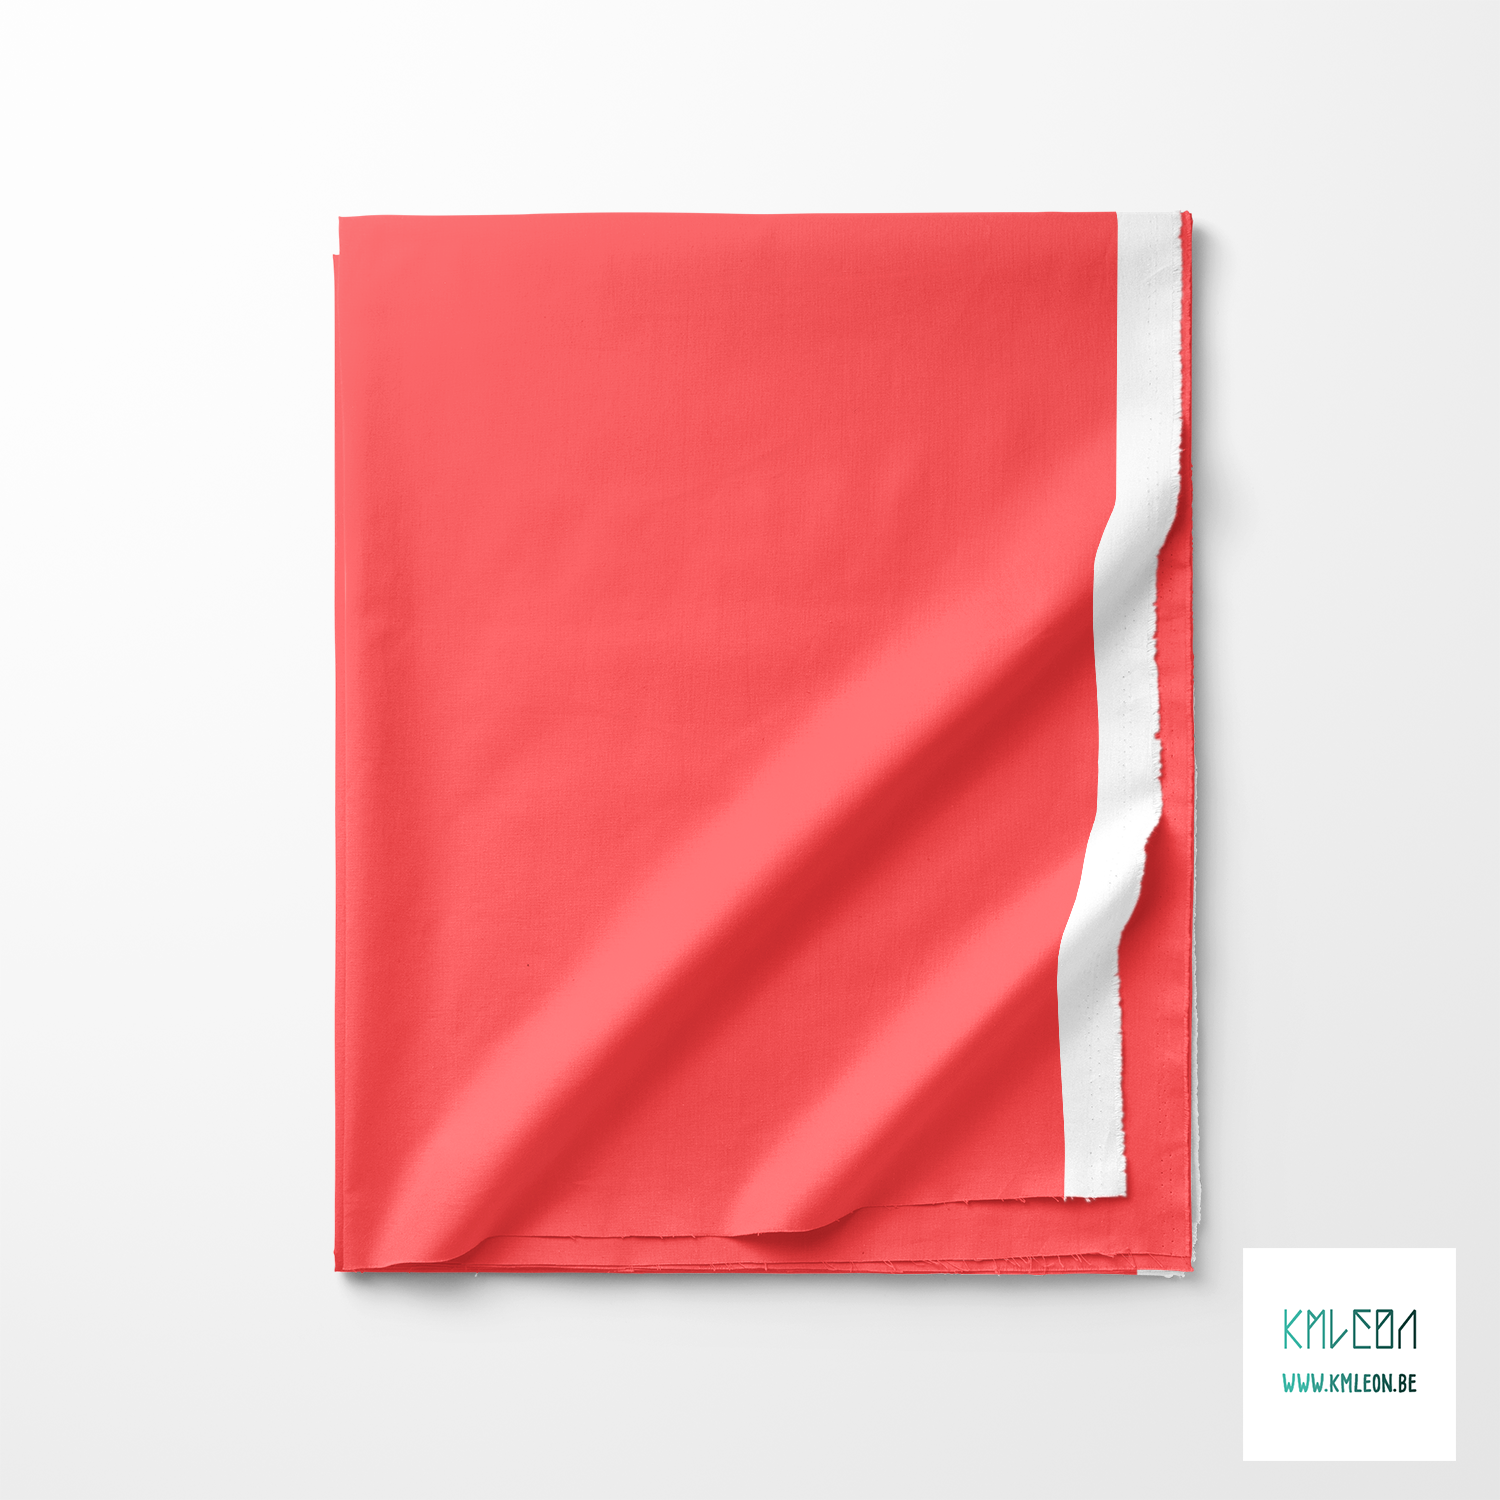 Solid coral red fabric